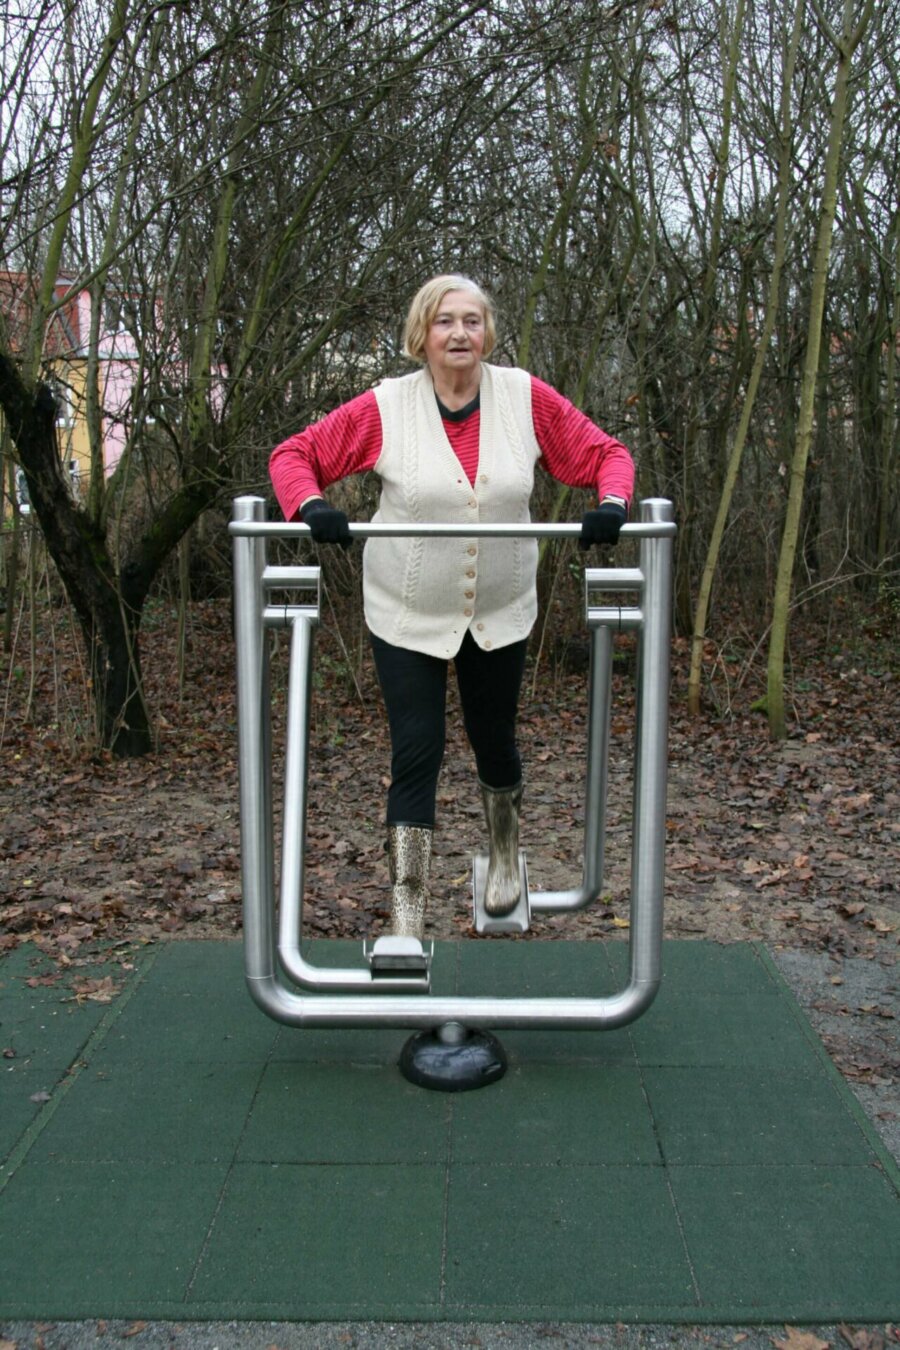 Exercise device walkers